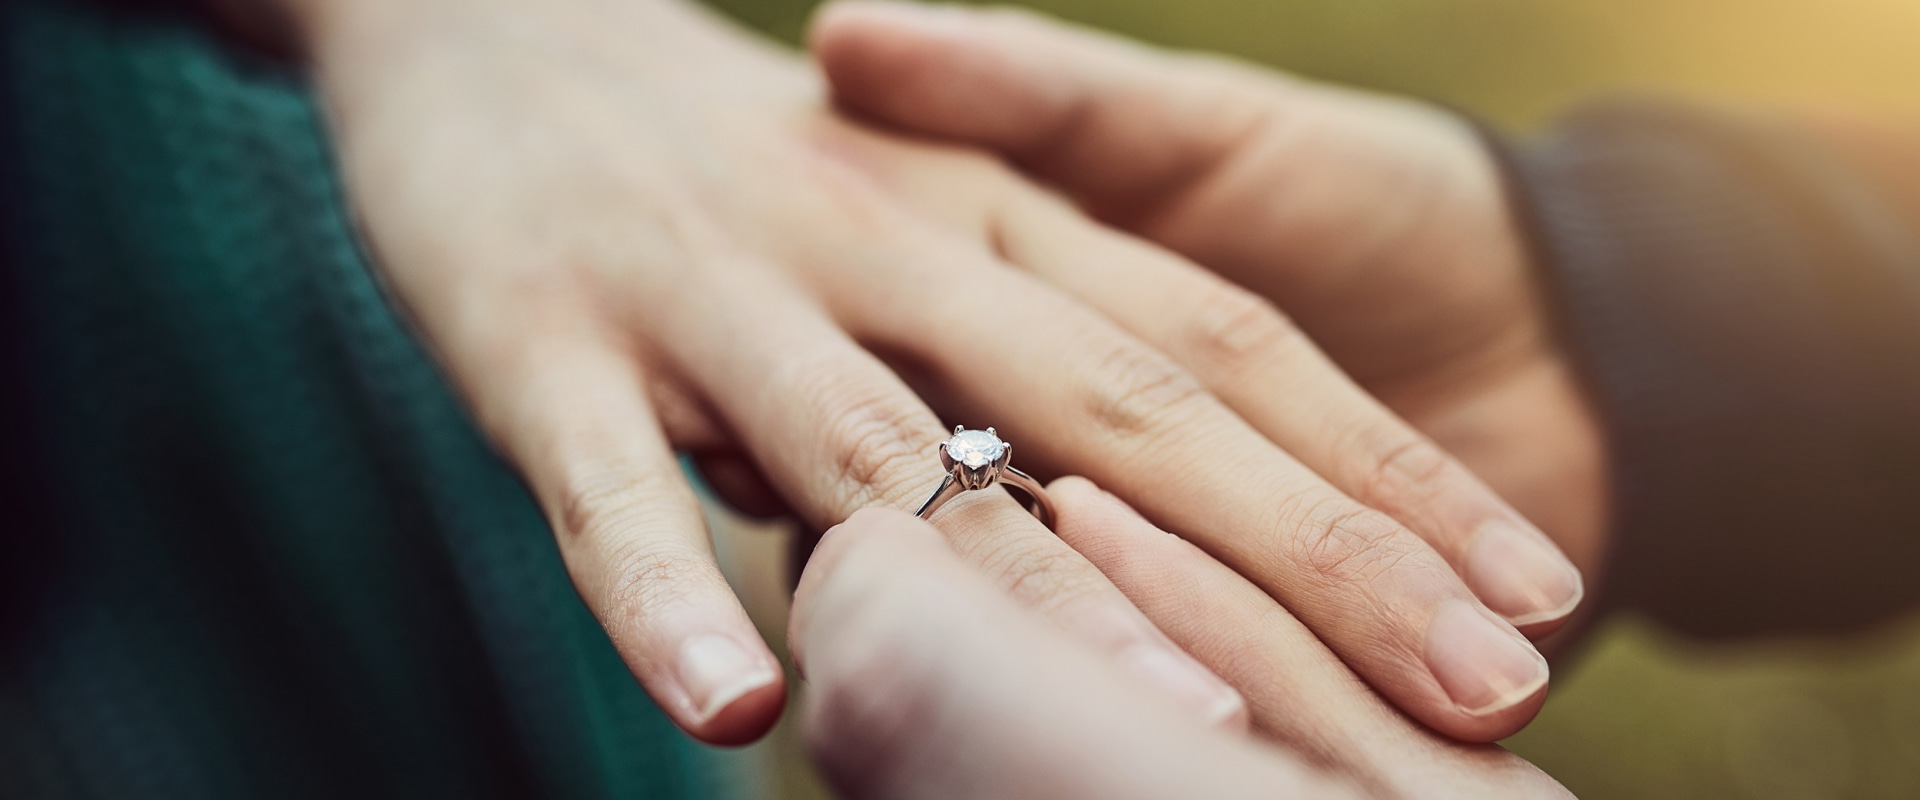 Is an Engagement Ring Really Necessary? A Look at the Pros and Cons